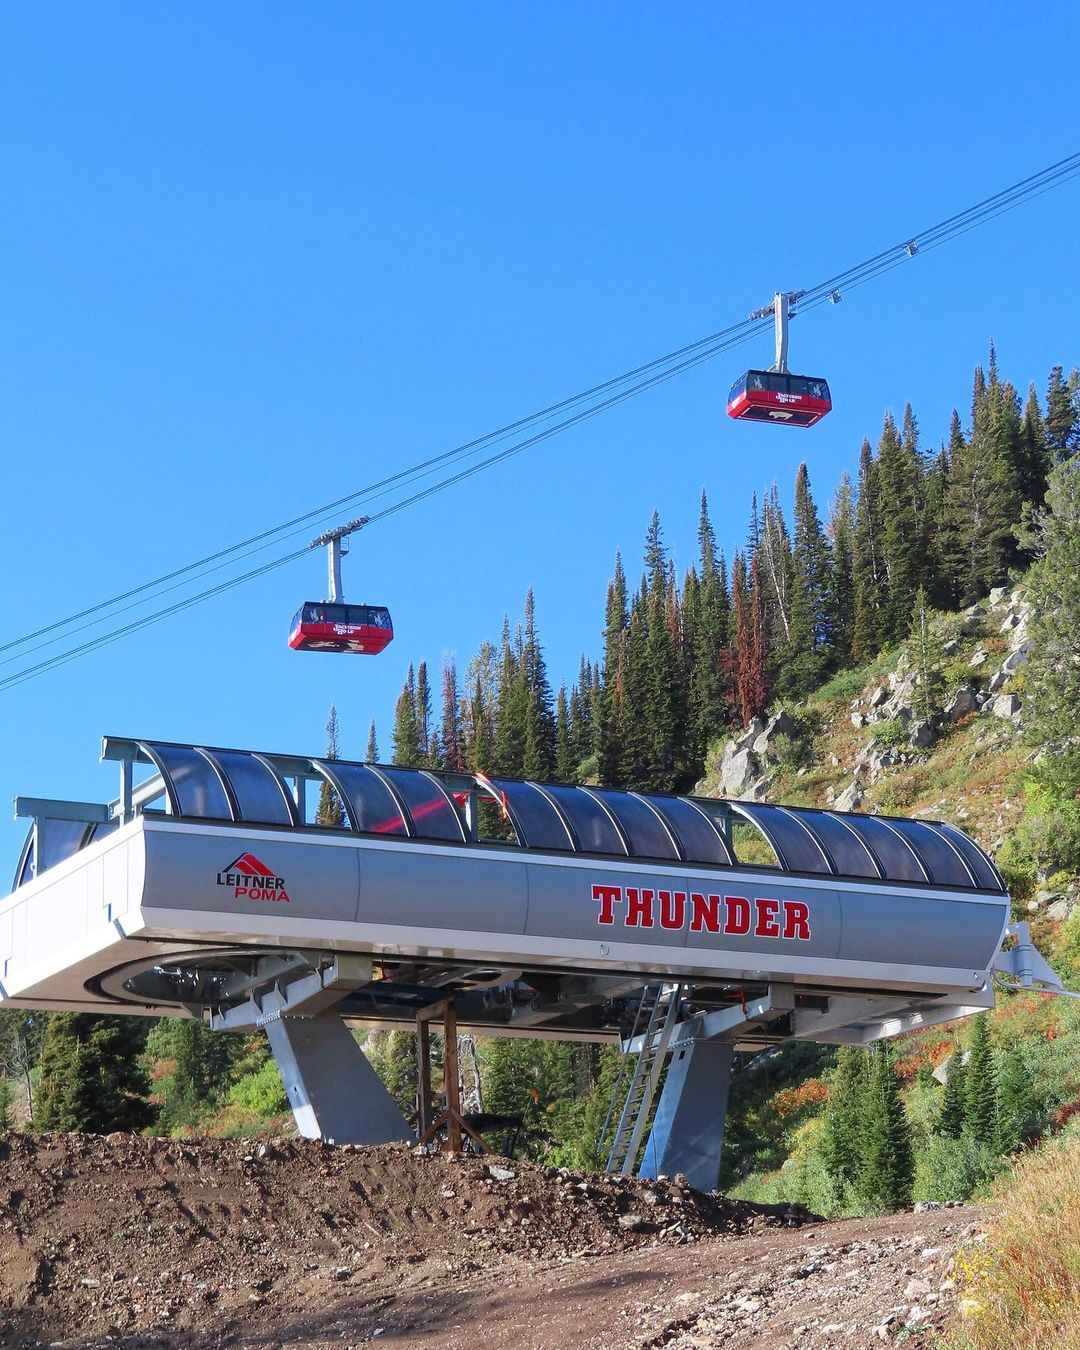 Thunder chair with tram cabins in the background